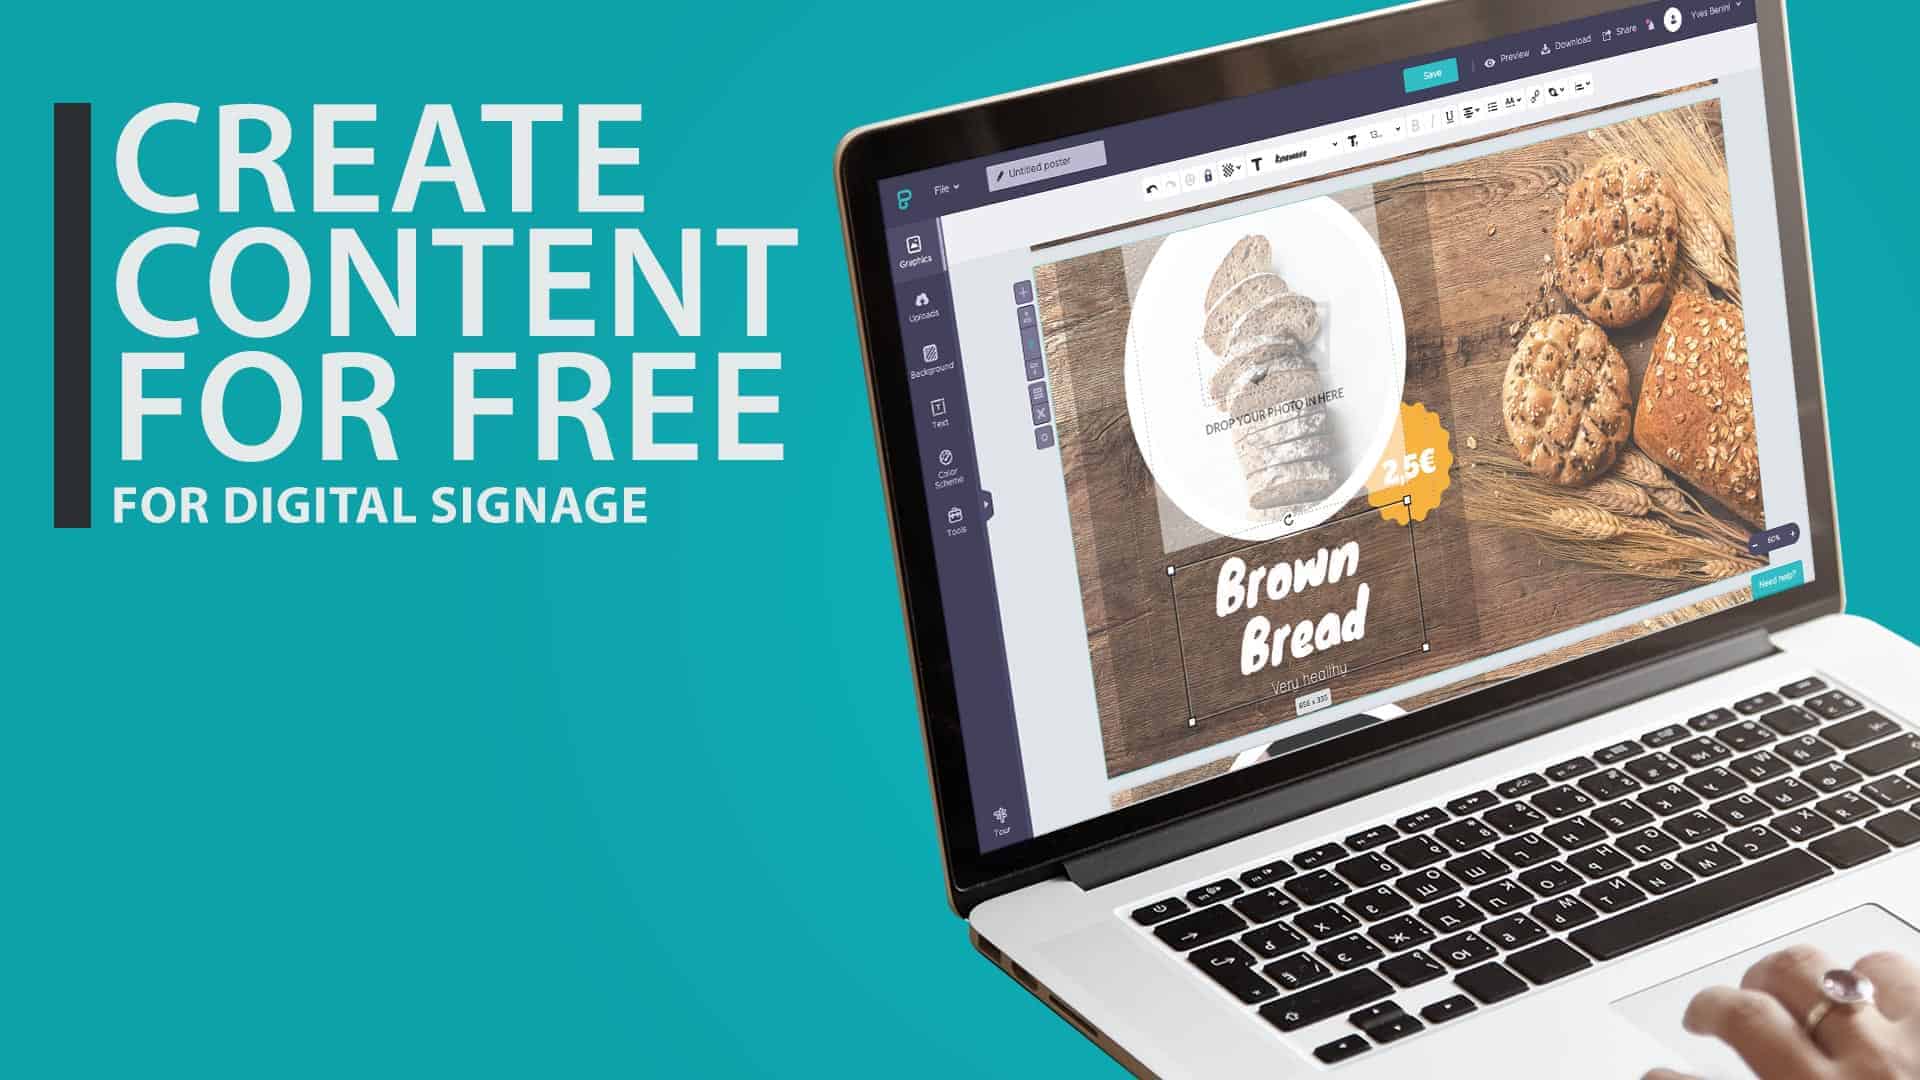 How to create content for digital signage for free – Tutorial (Video)